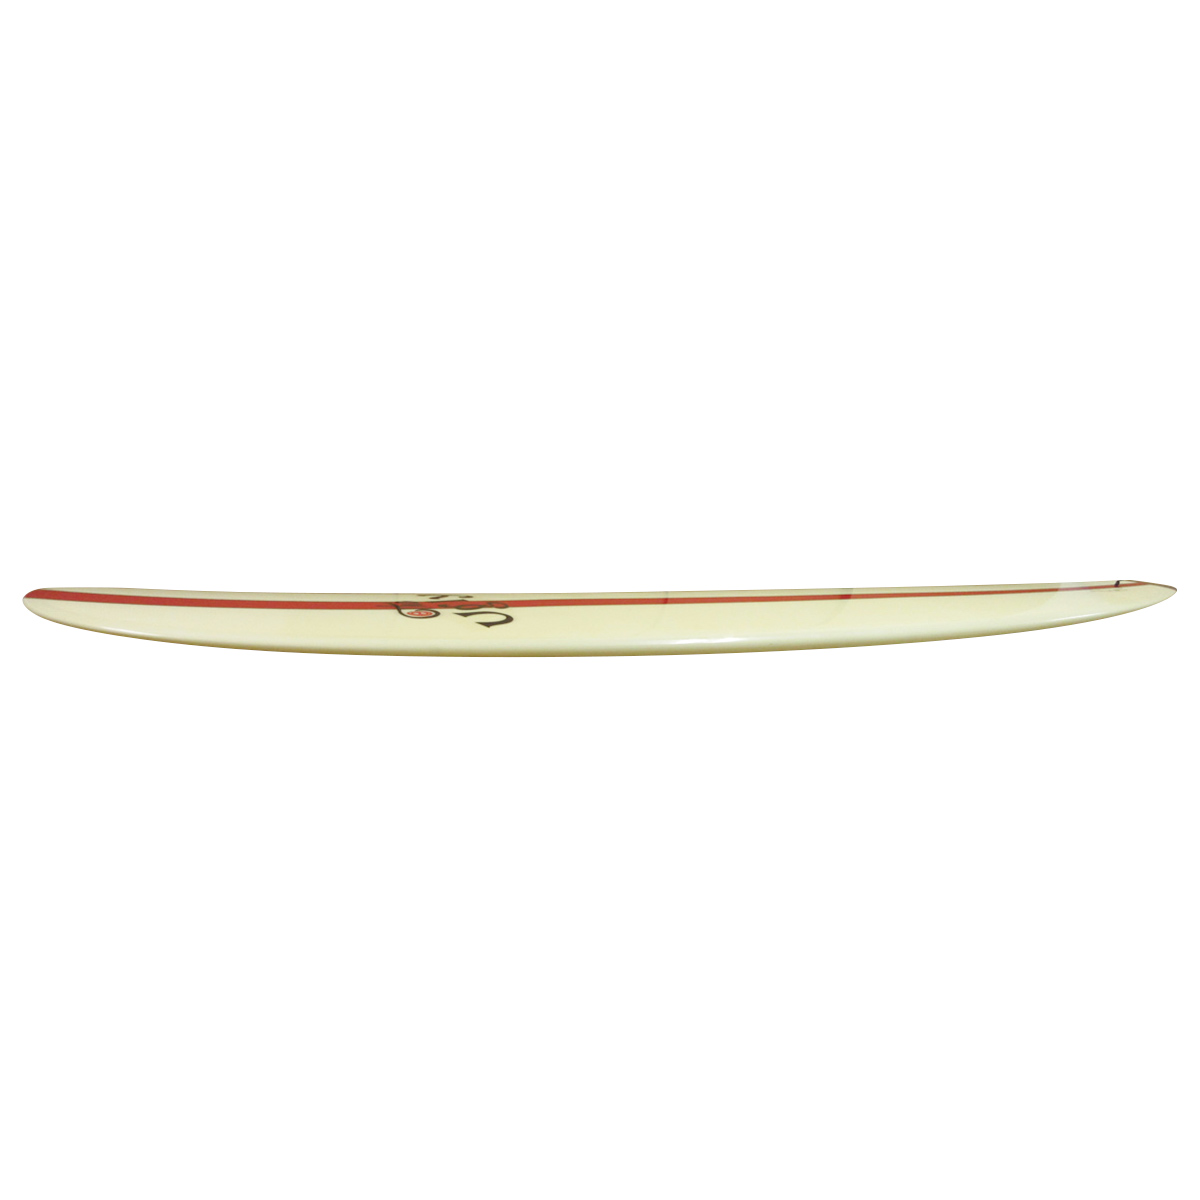 CON SURFBOARD  / The Ugly 9`8 Shaped By Bruce Grant 